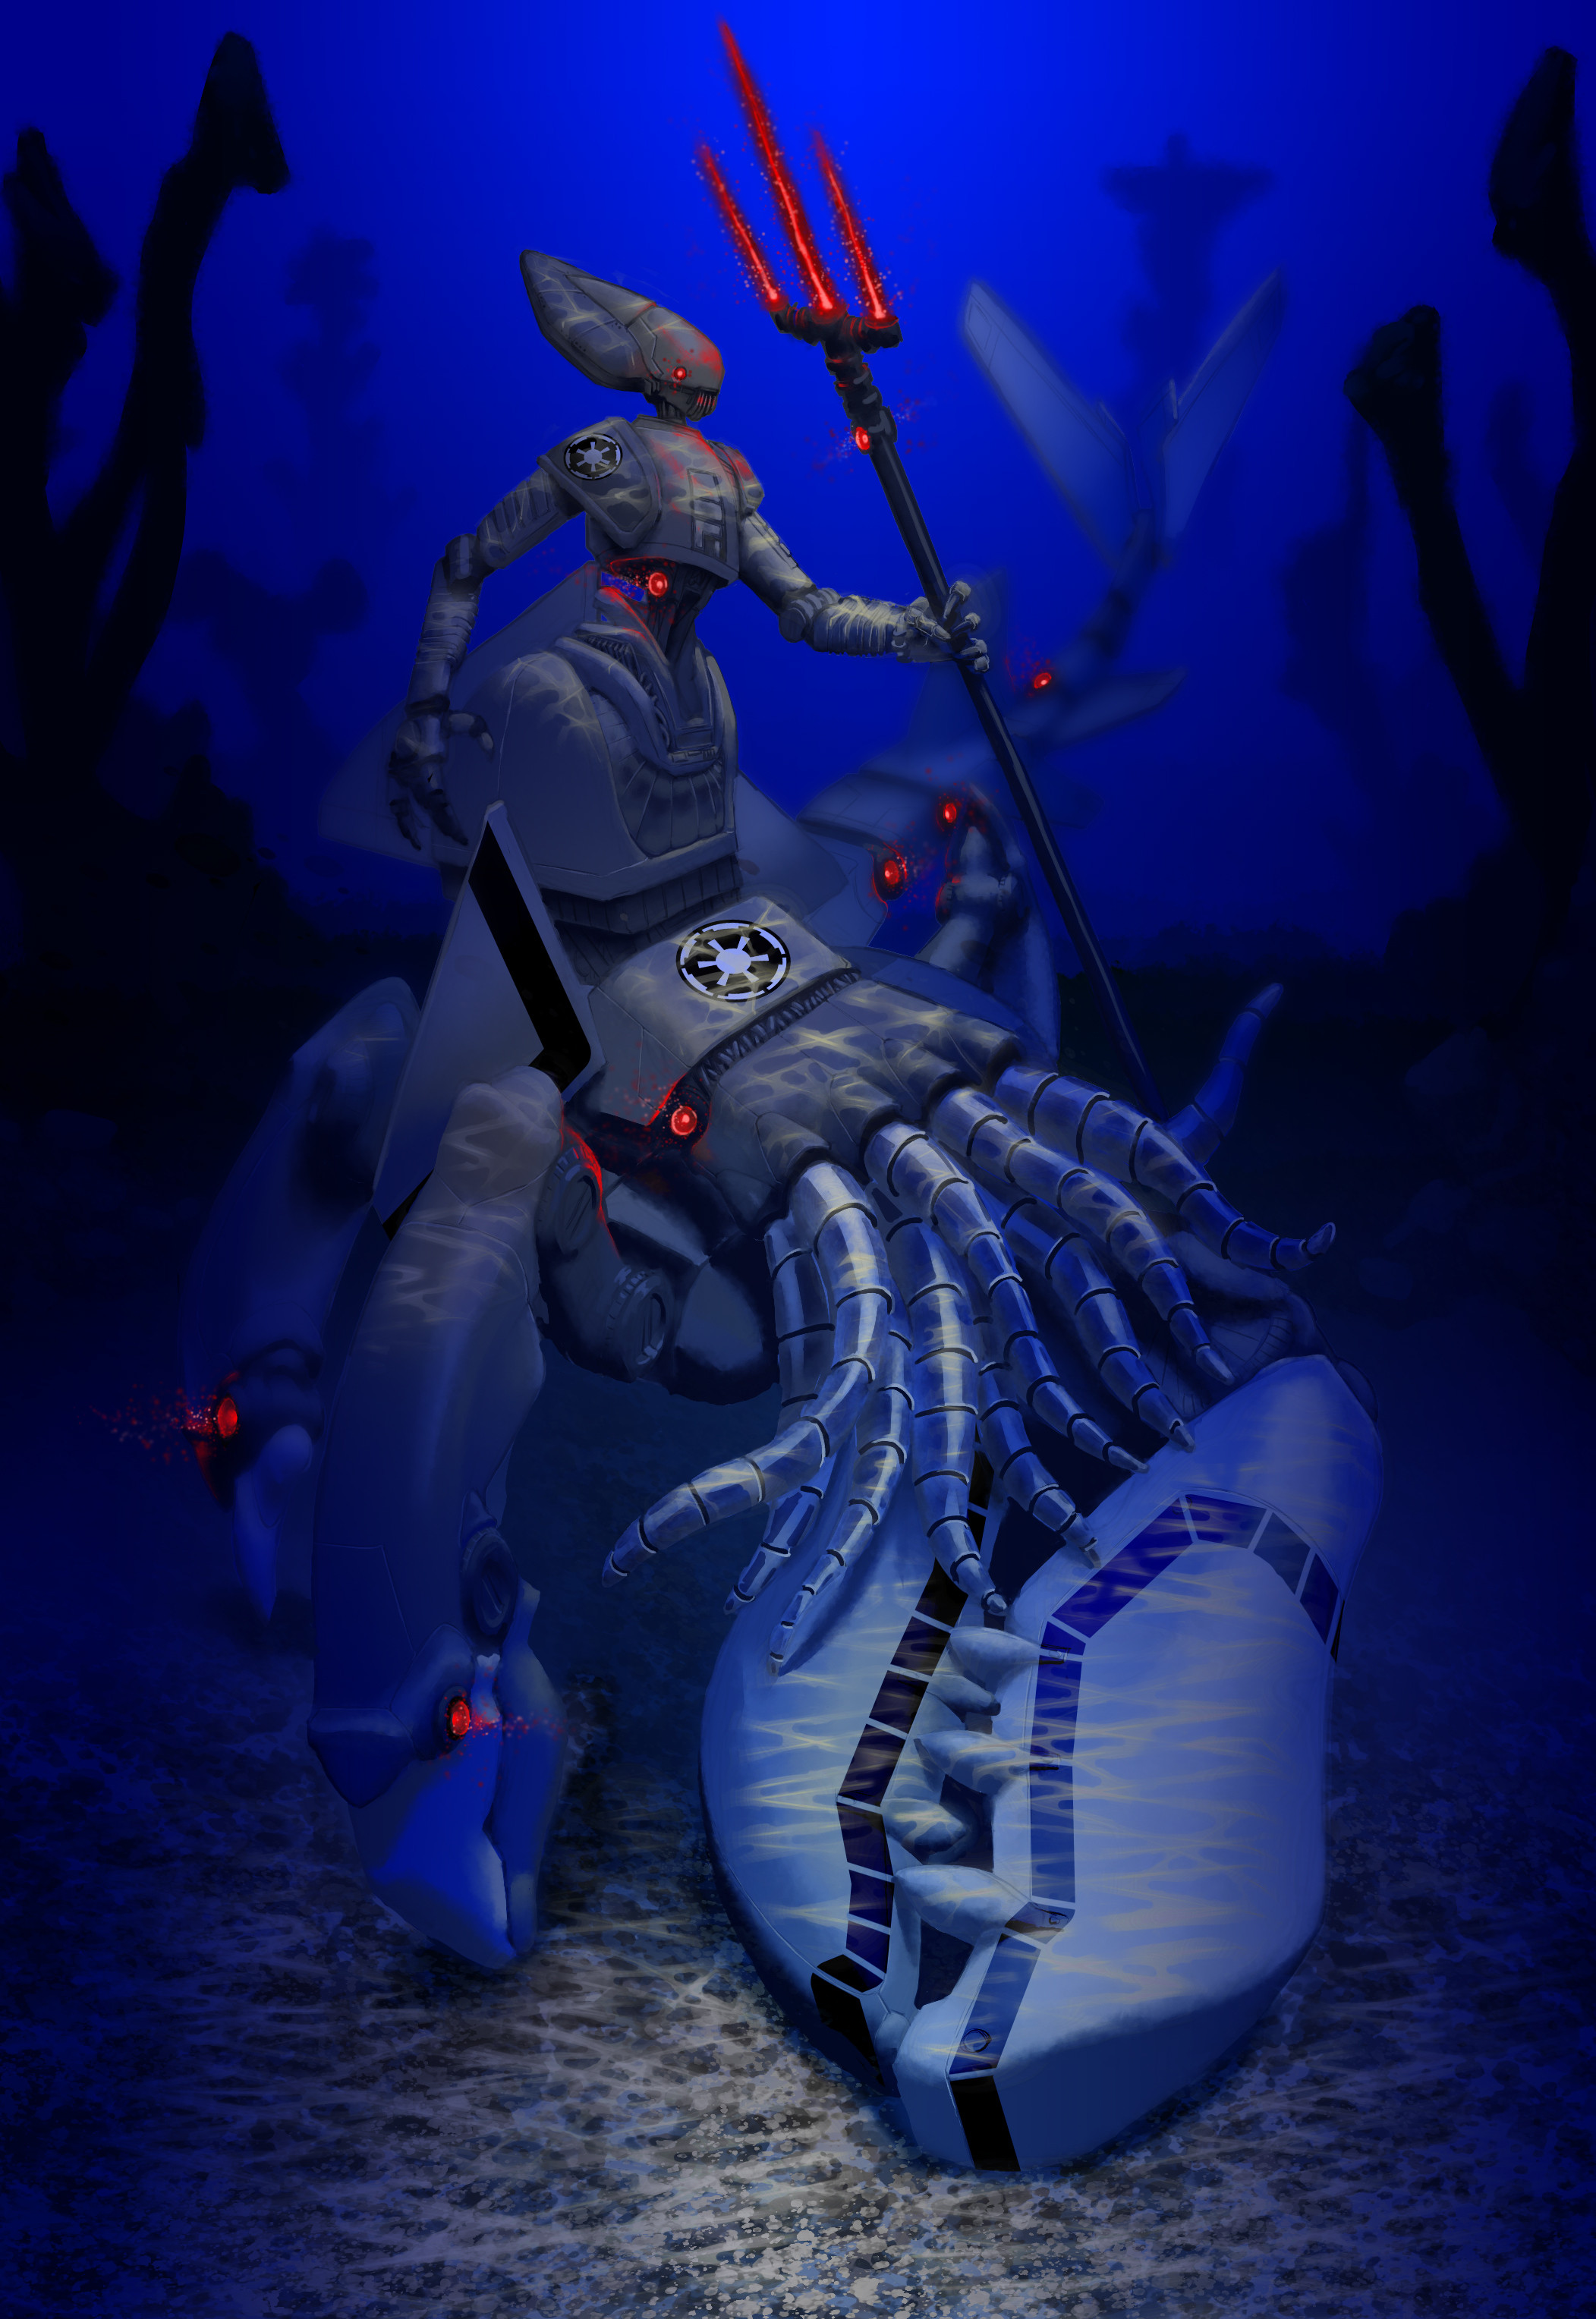 Diving into the frigid mysteries of the deep sea, the Imperial Deep Sea Droid emanates a chilling glow. Armed with its trident lightsaber, it blazes a trail of exploration and discovery.